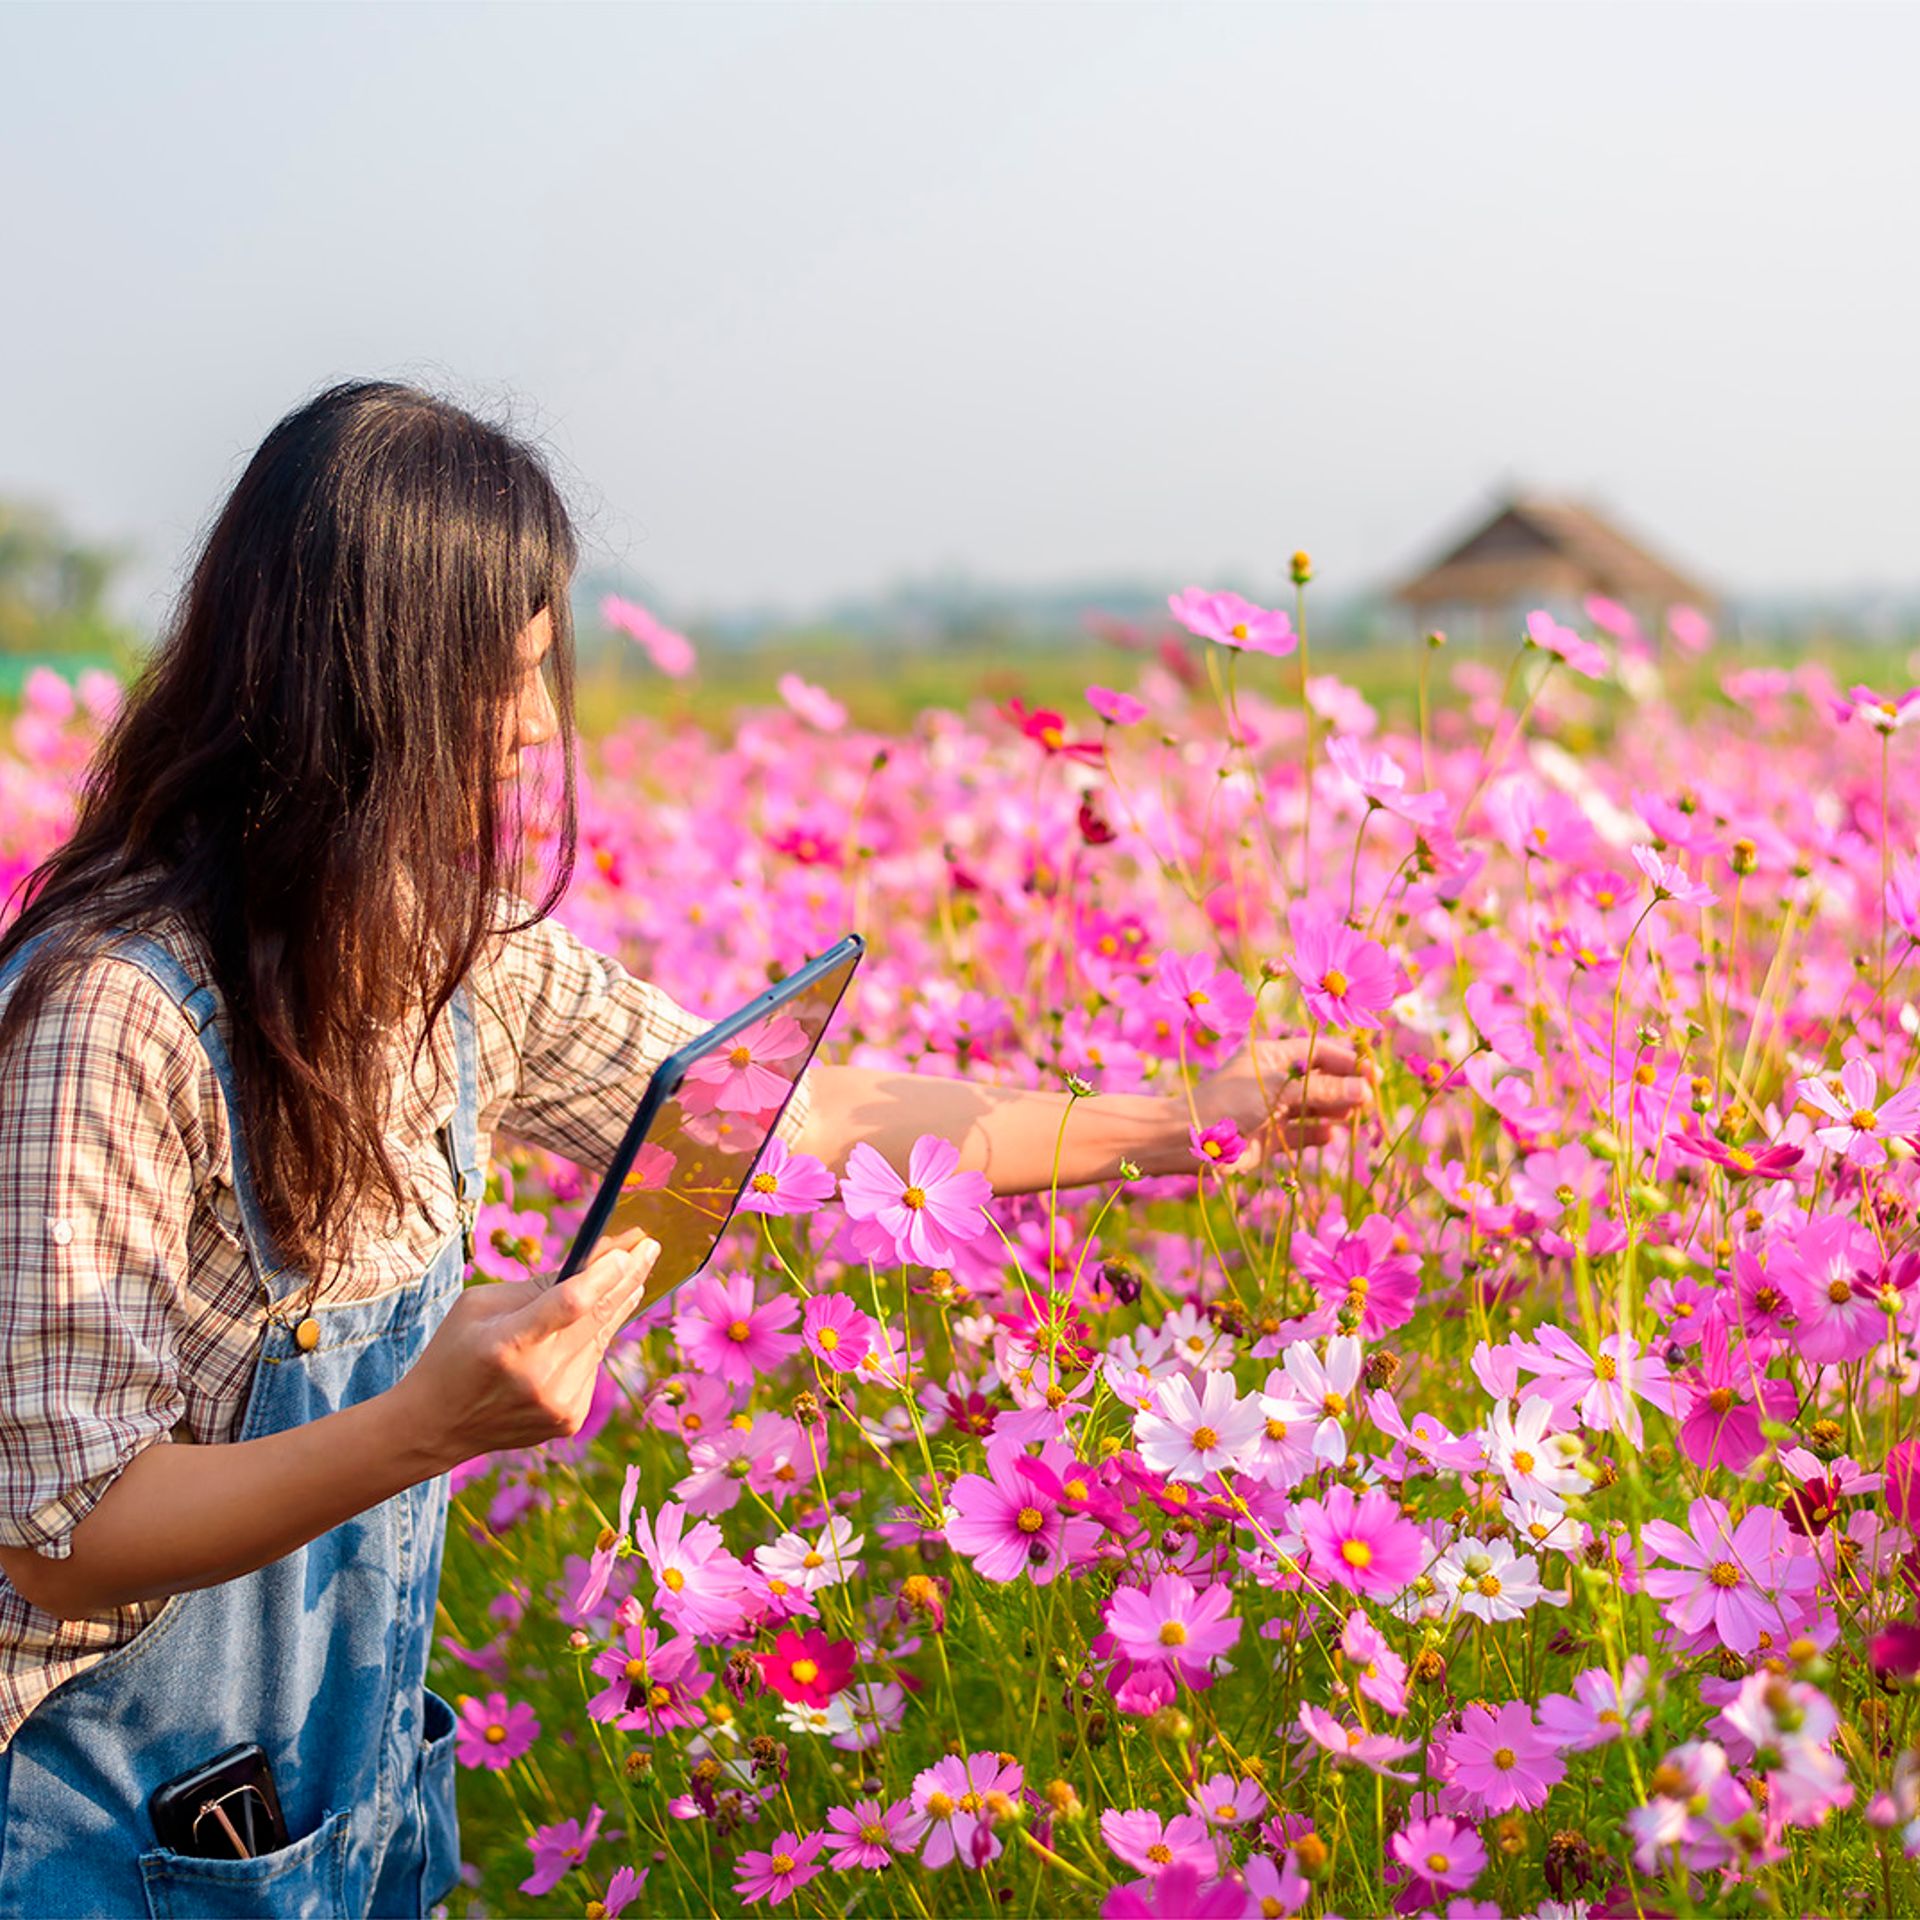 Image of a certification body auditor inspecting flower production in a field